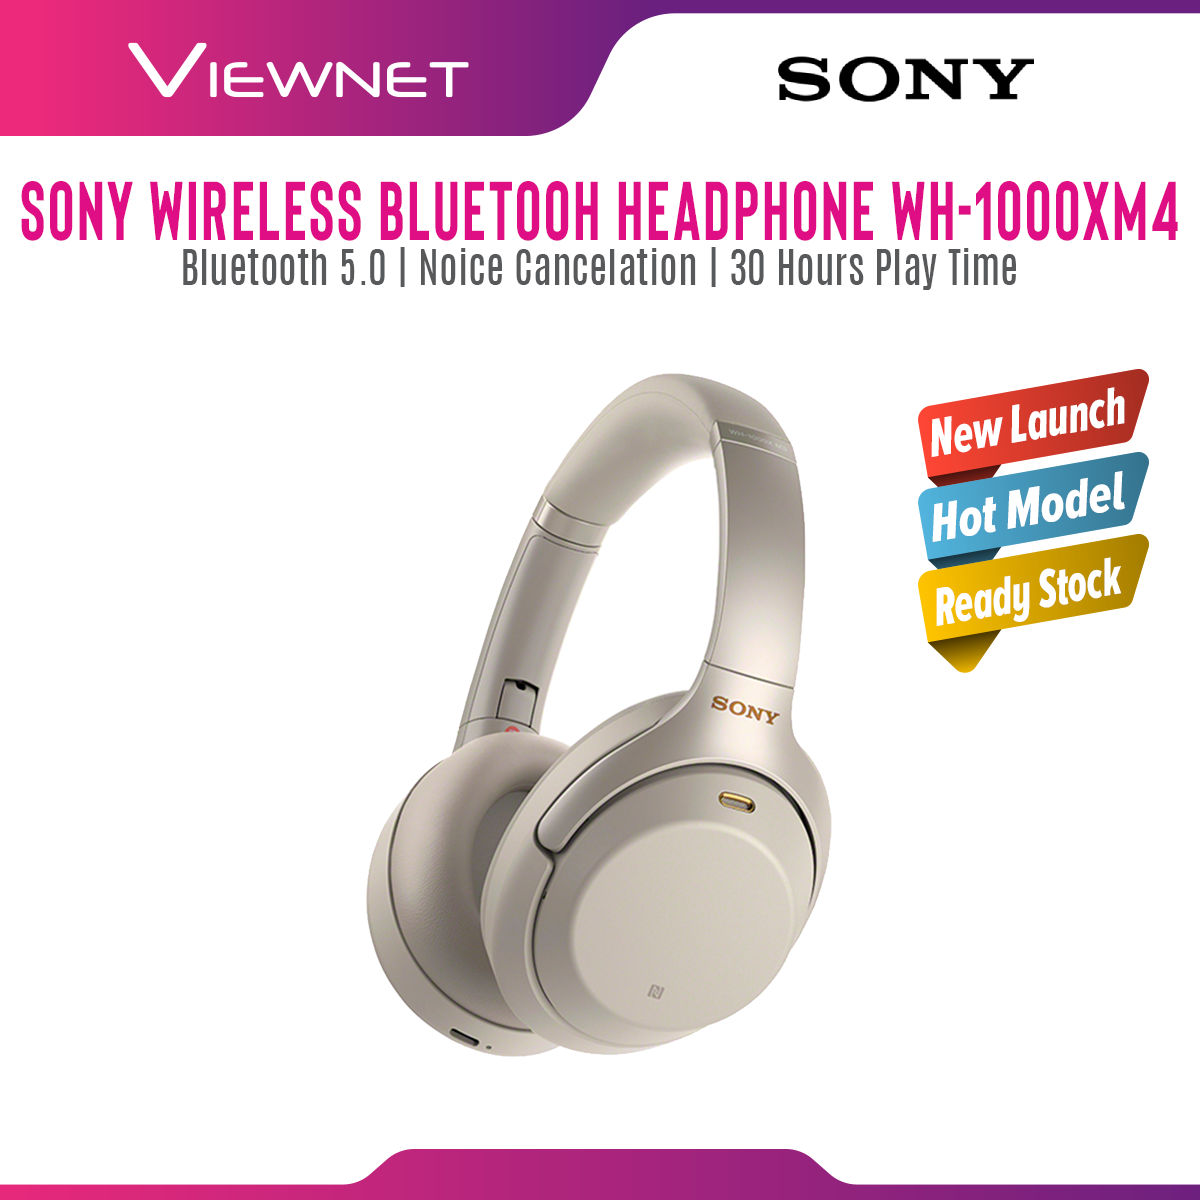 Sony WH-1000XM5 XM5 / Sony WH-1000XM4 XM4 Wireless Bluetooth Noise Cancelling Headphone with Noise Cancelling, Wearing Detection, Touch Control, Up to 30 Hours Battery, Voice Assistant Compatible